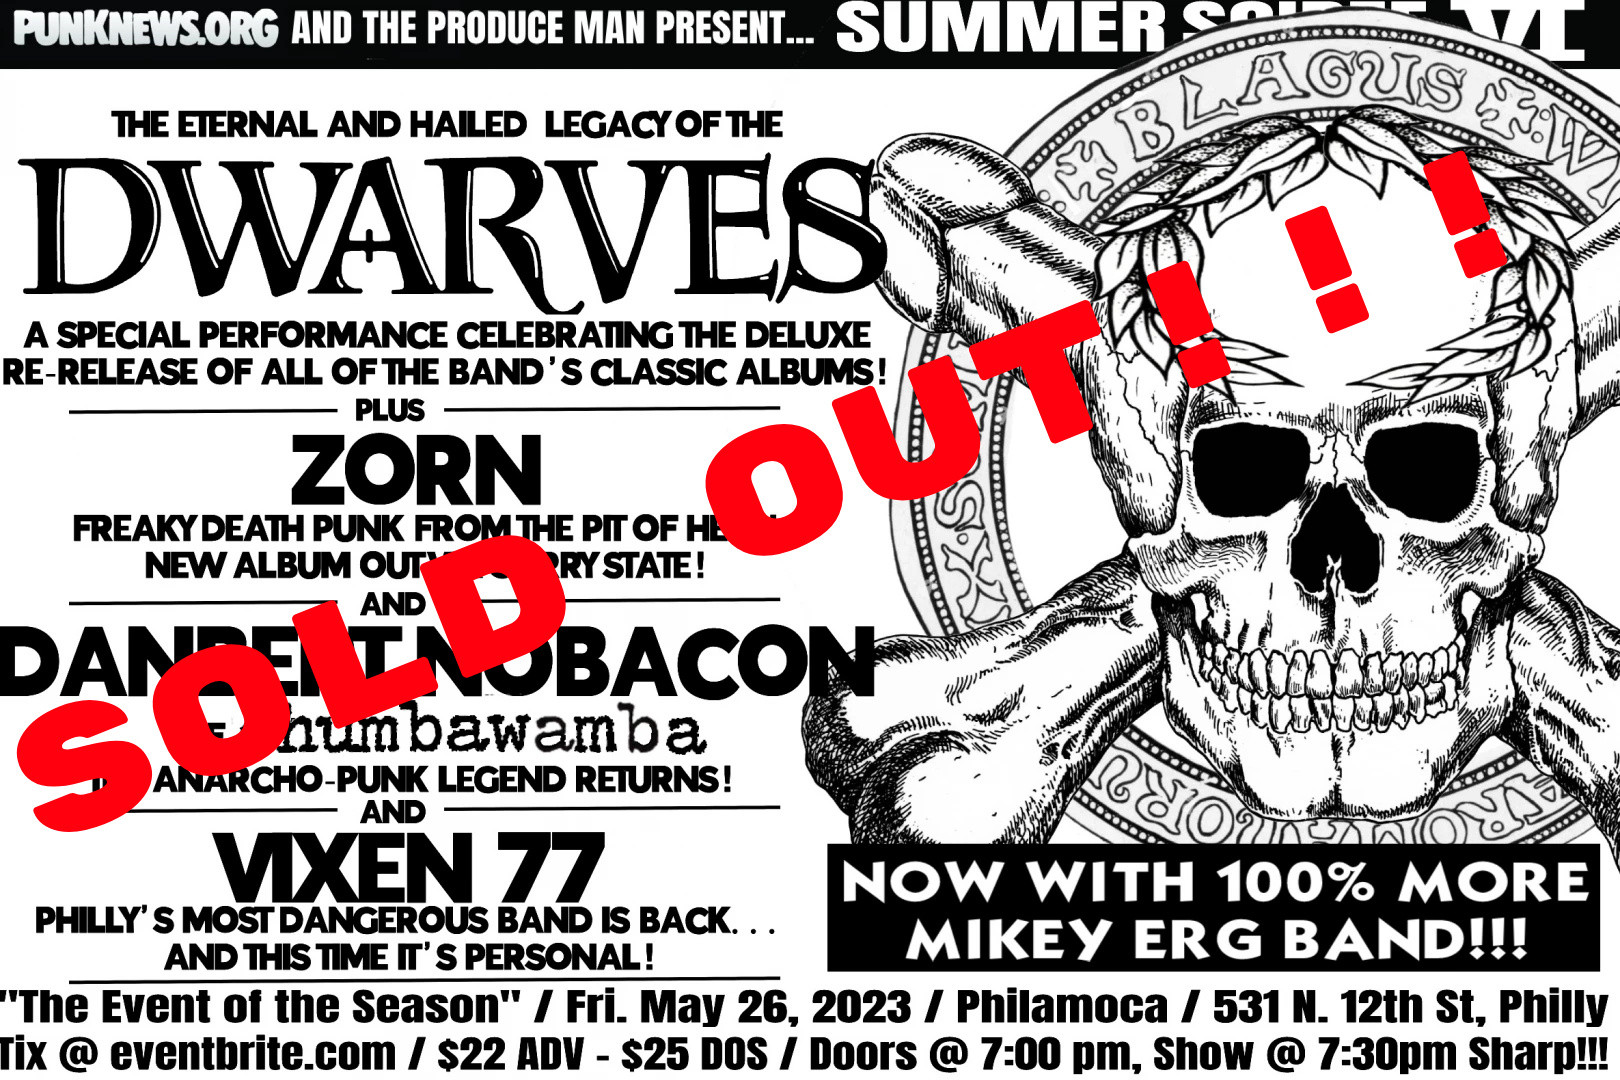 Summer Soiree VI, headlined by the Dwarves, is now SOLD OUT!!!